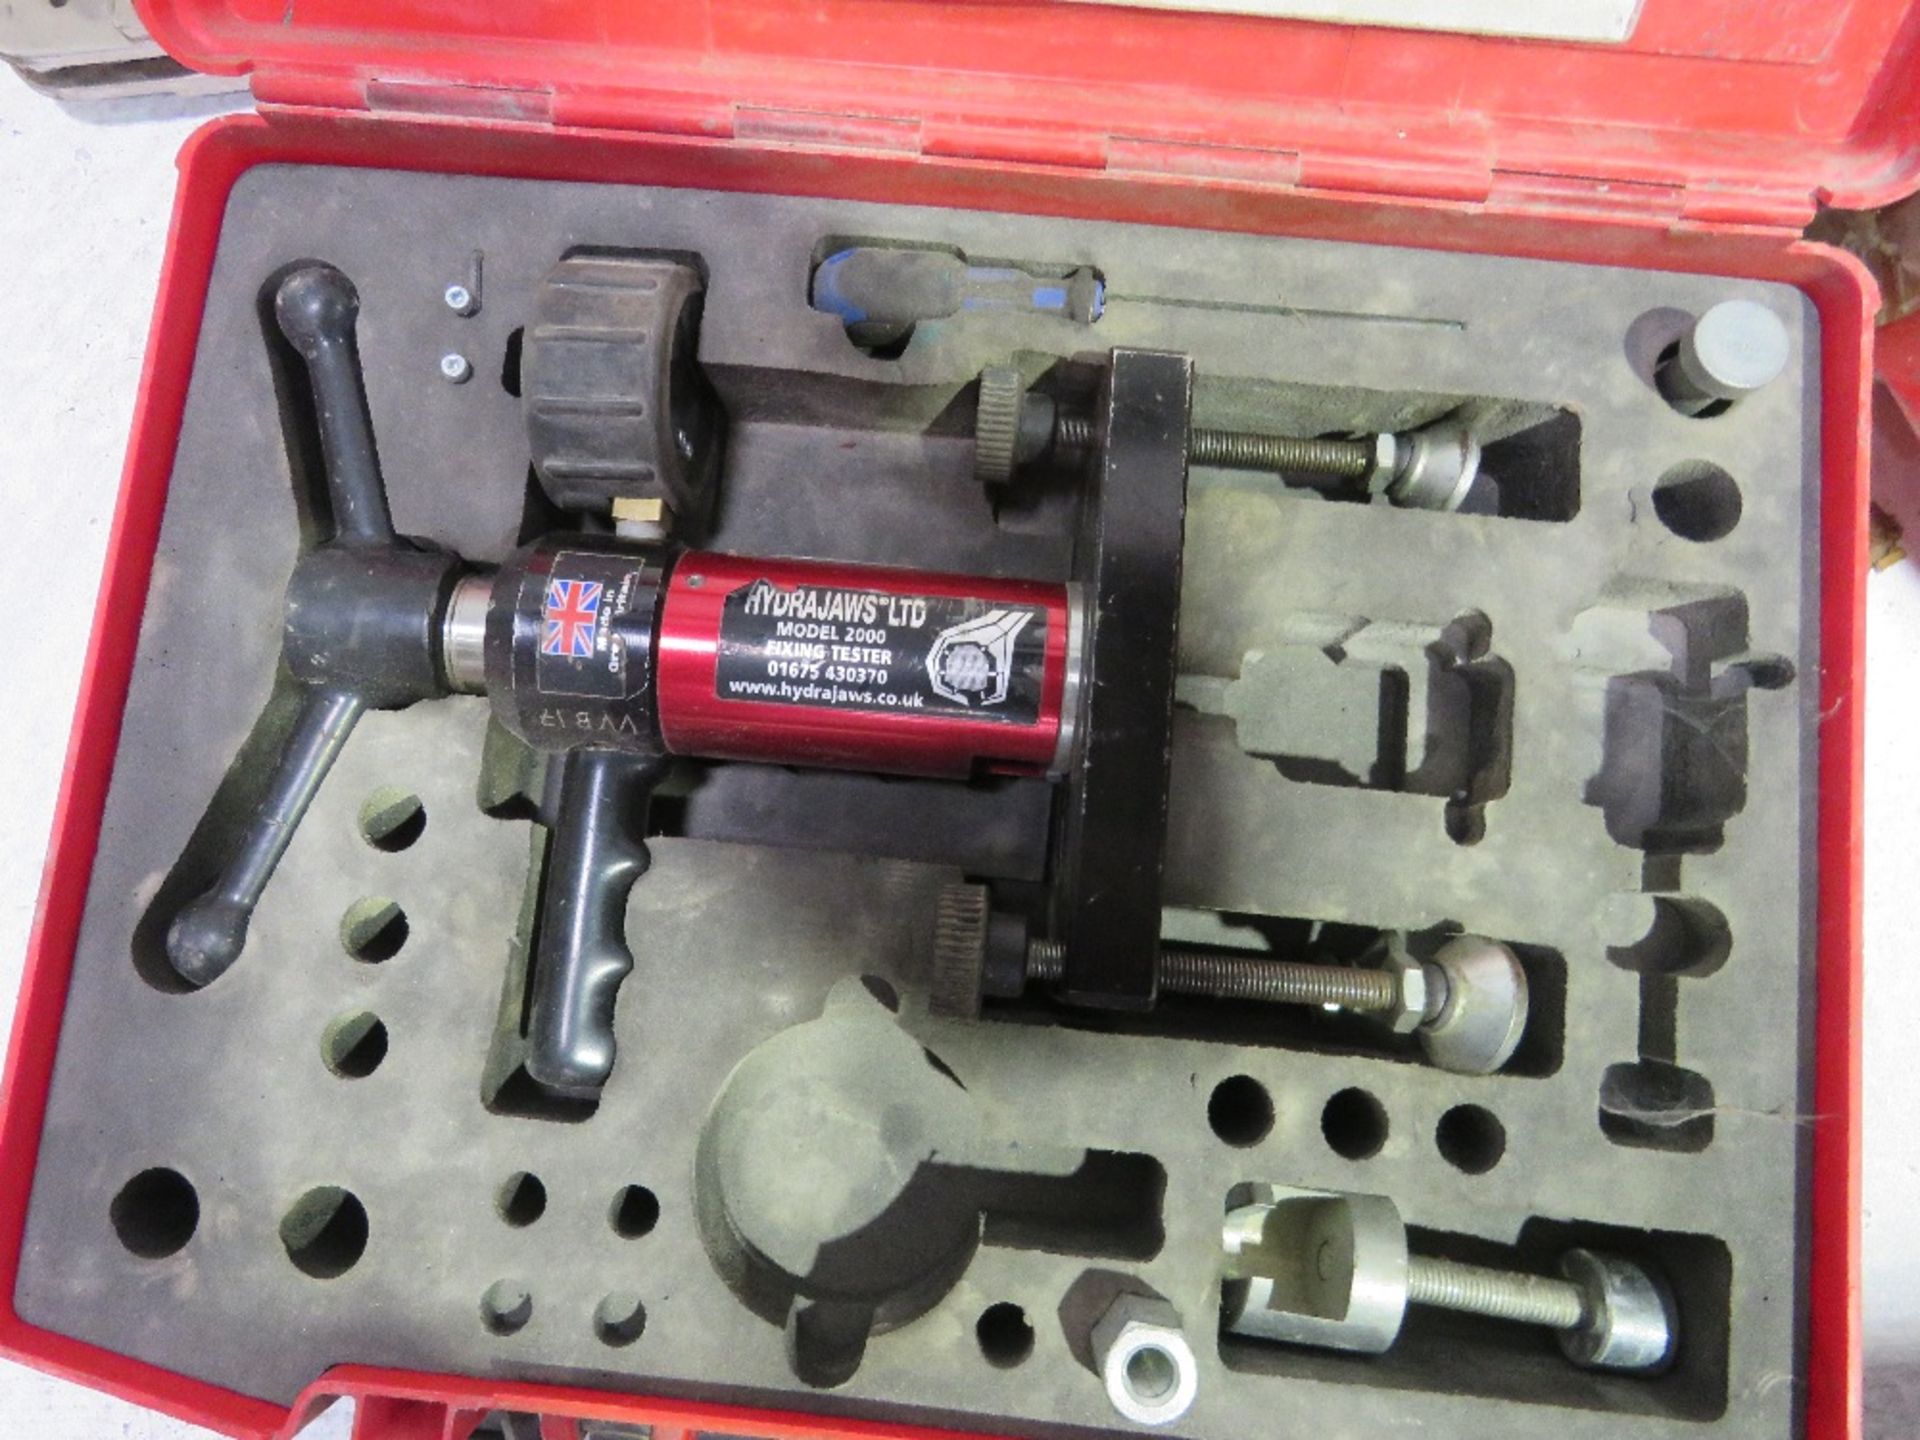 2 X HYDRA JAWS MODEL 2000 MOUNTING TESTER UNITS IN CASES.....THIS LOT IS SOLD UNDER THE AUCTIONEERS - Image 4 of 6